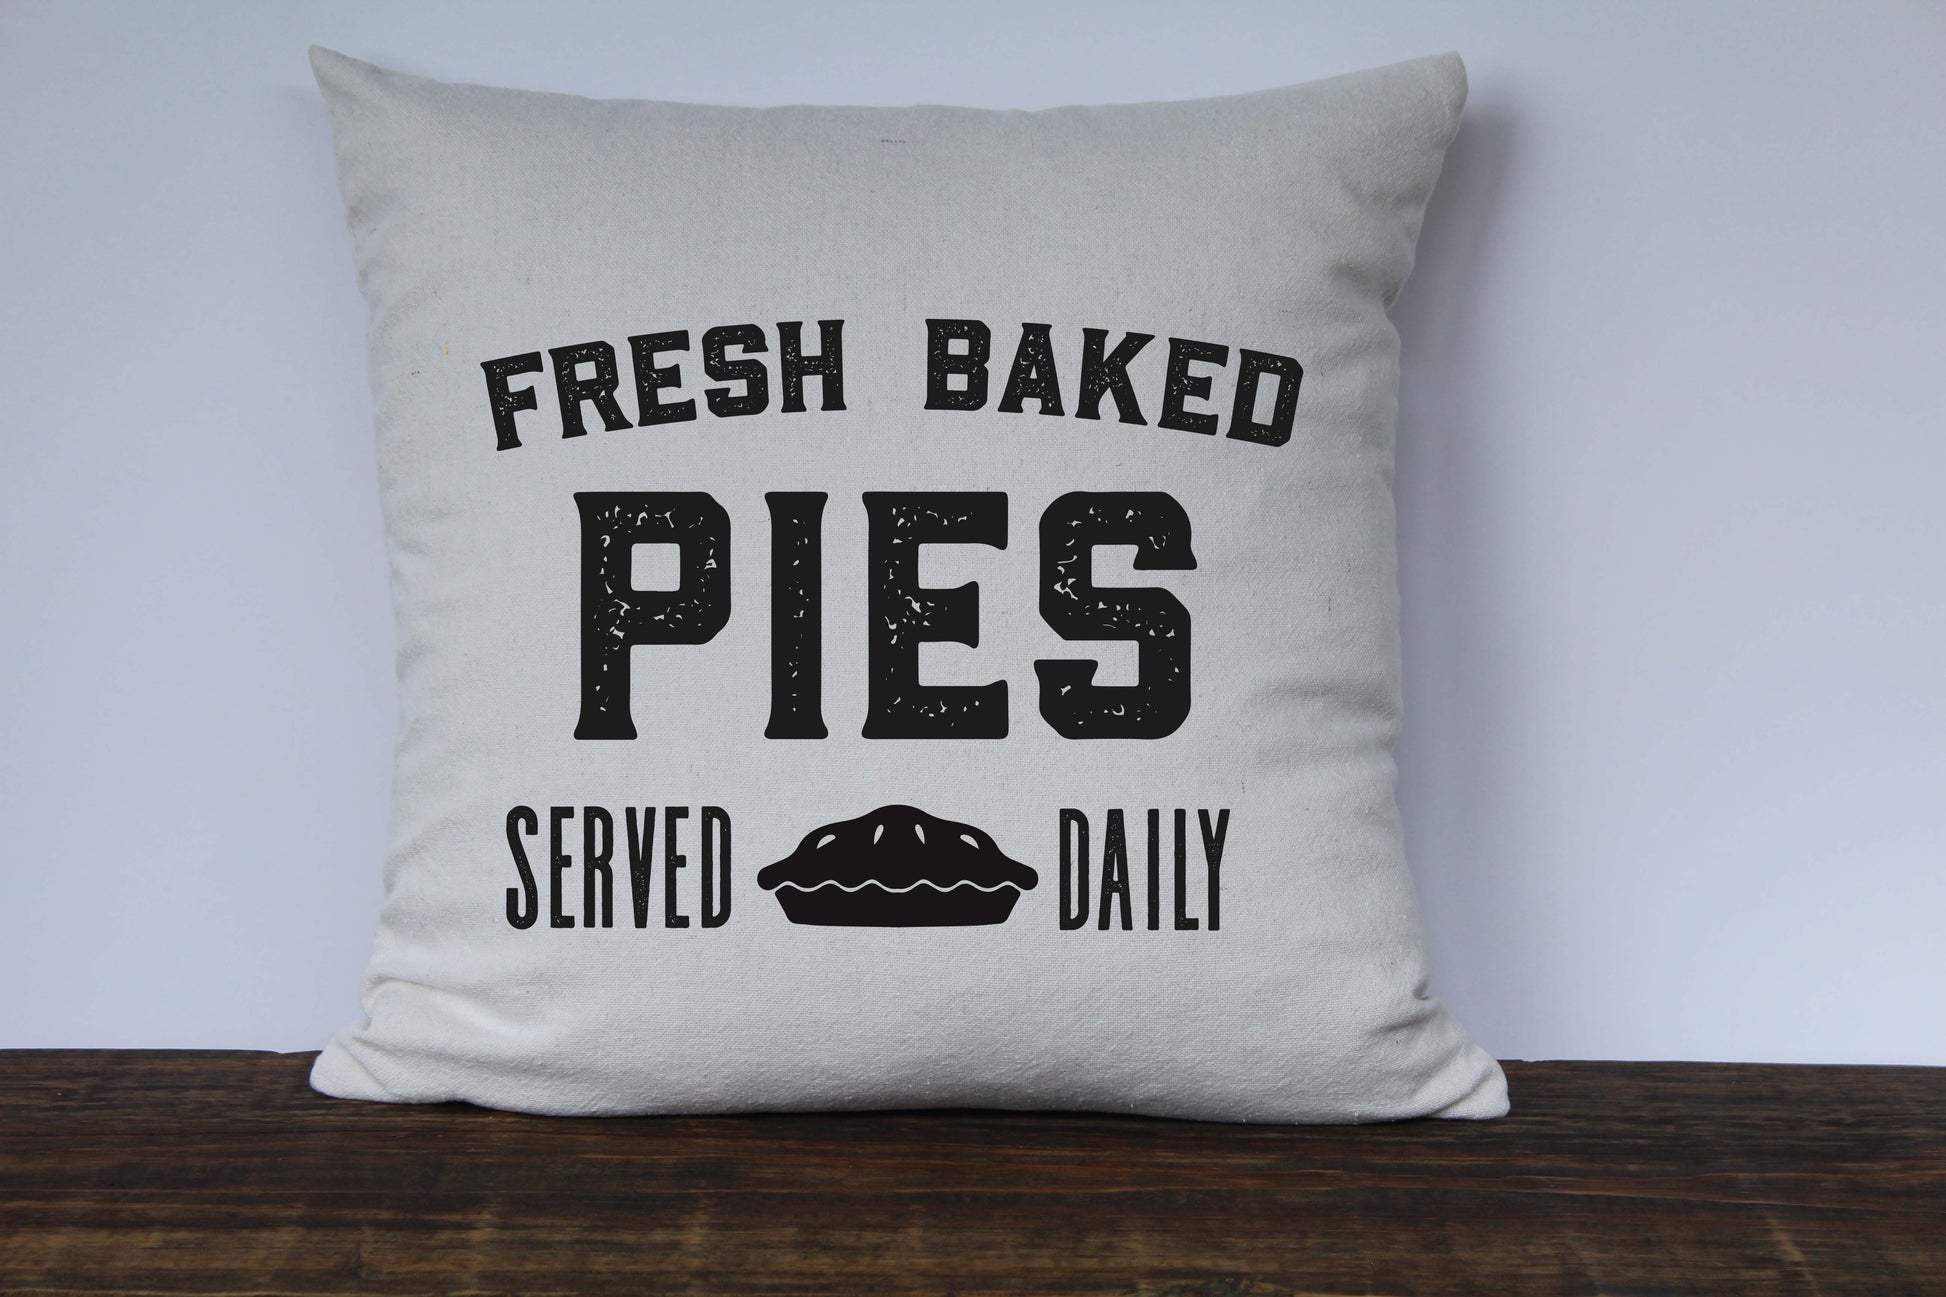 Fresh Baked Pies Served Daily Pillow Cover - Returning Grace Designs